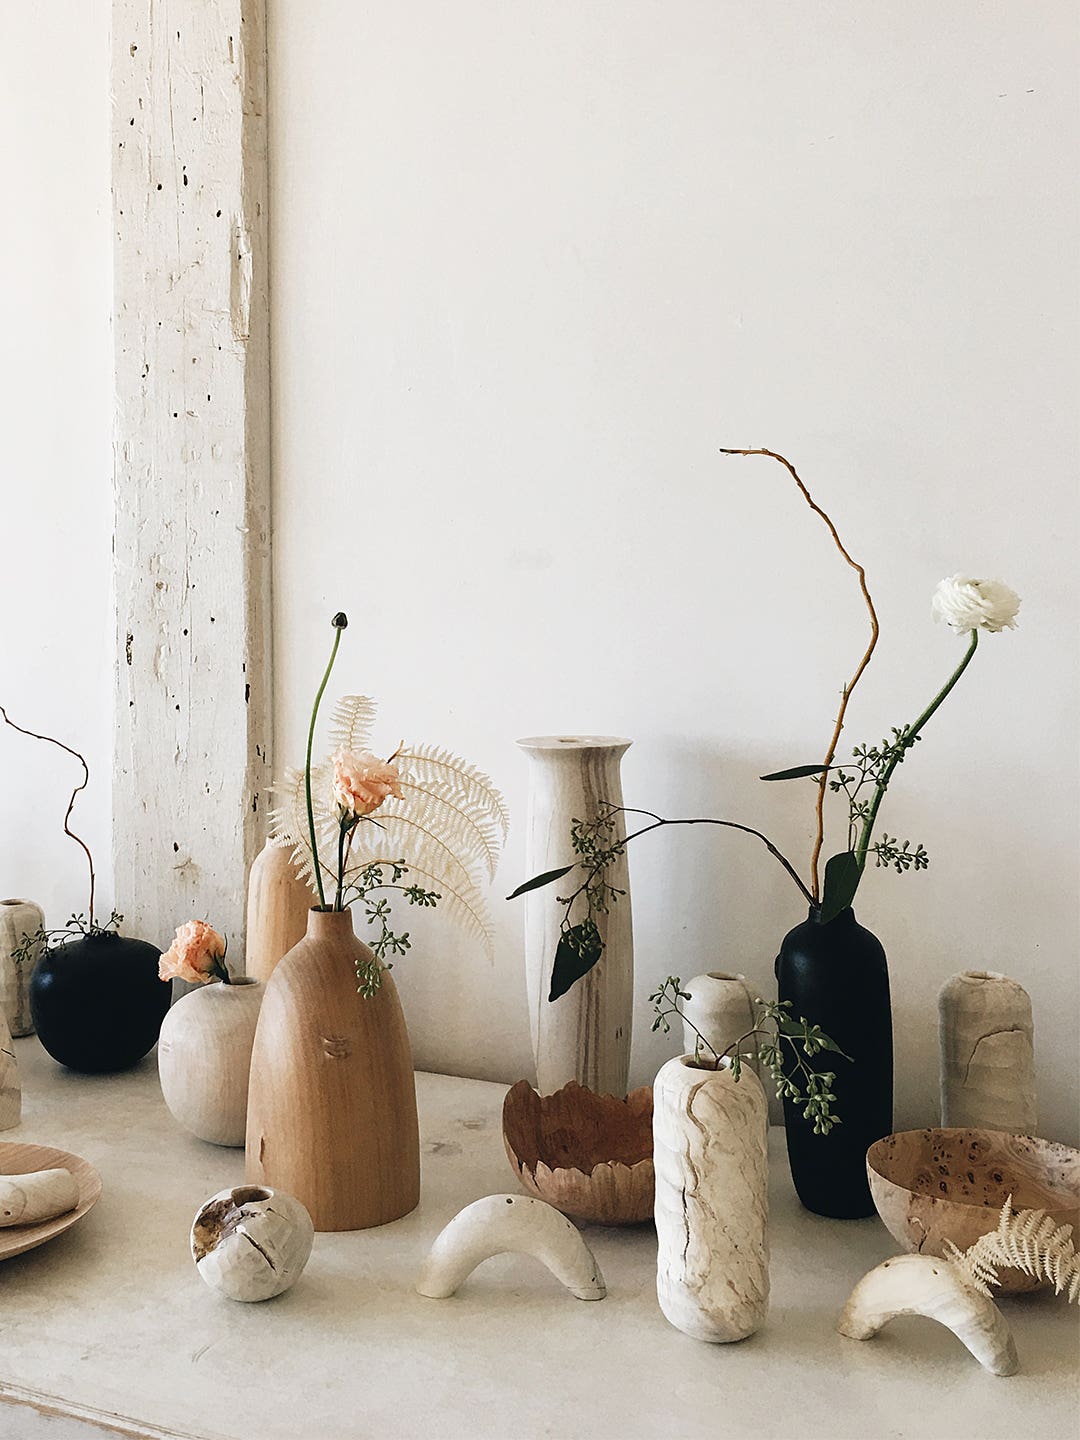 vases and other sculptural objects on a table